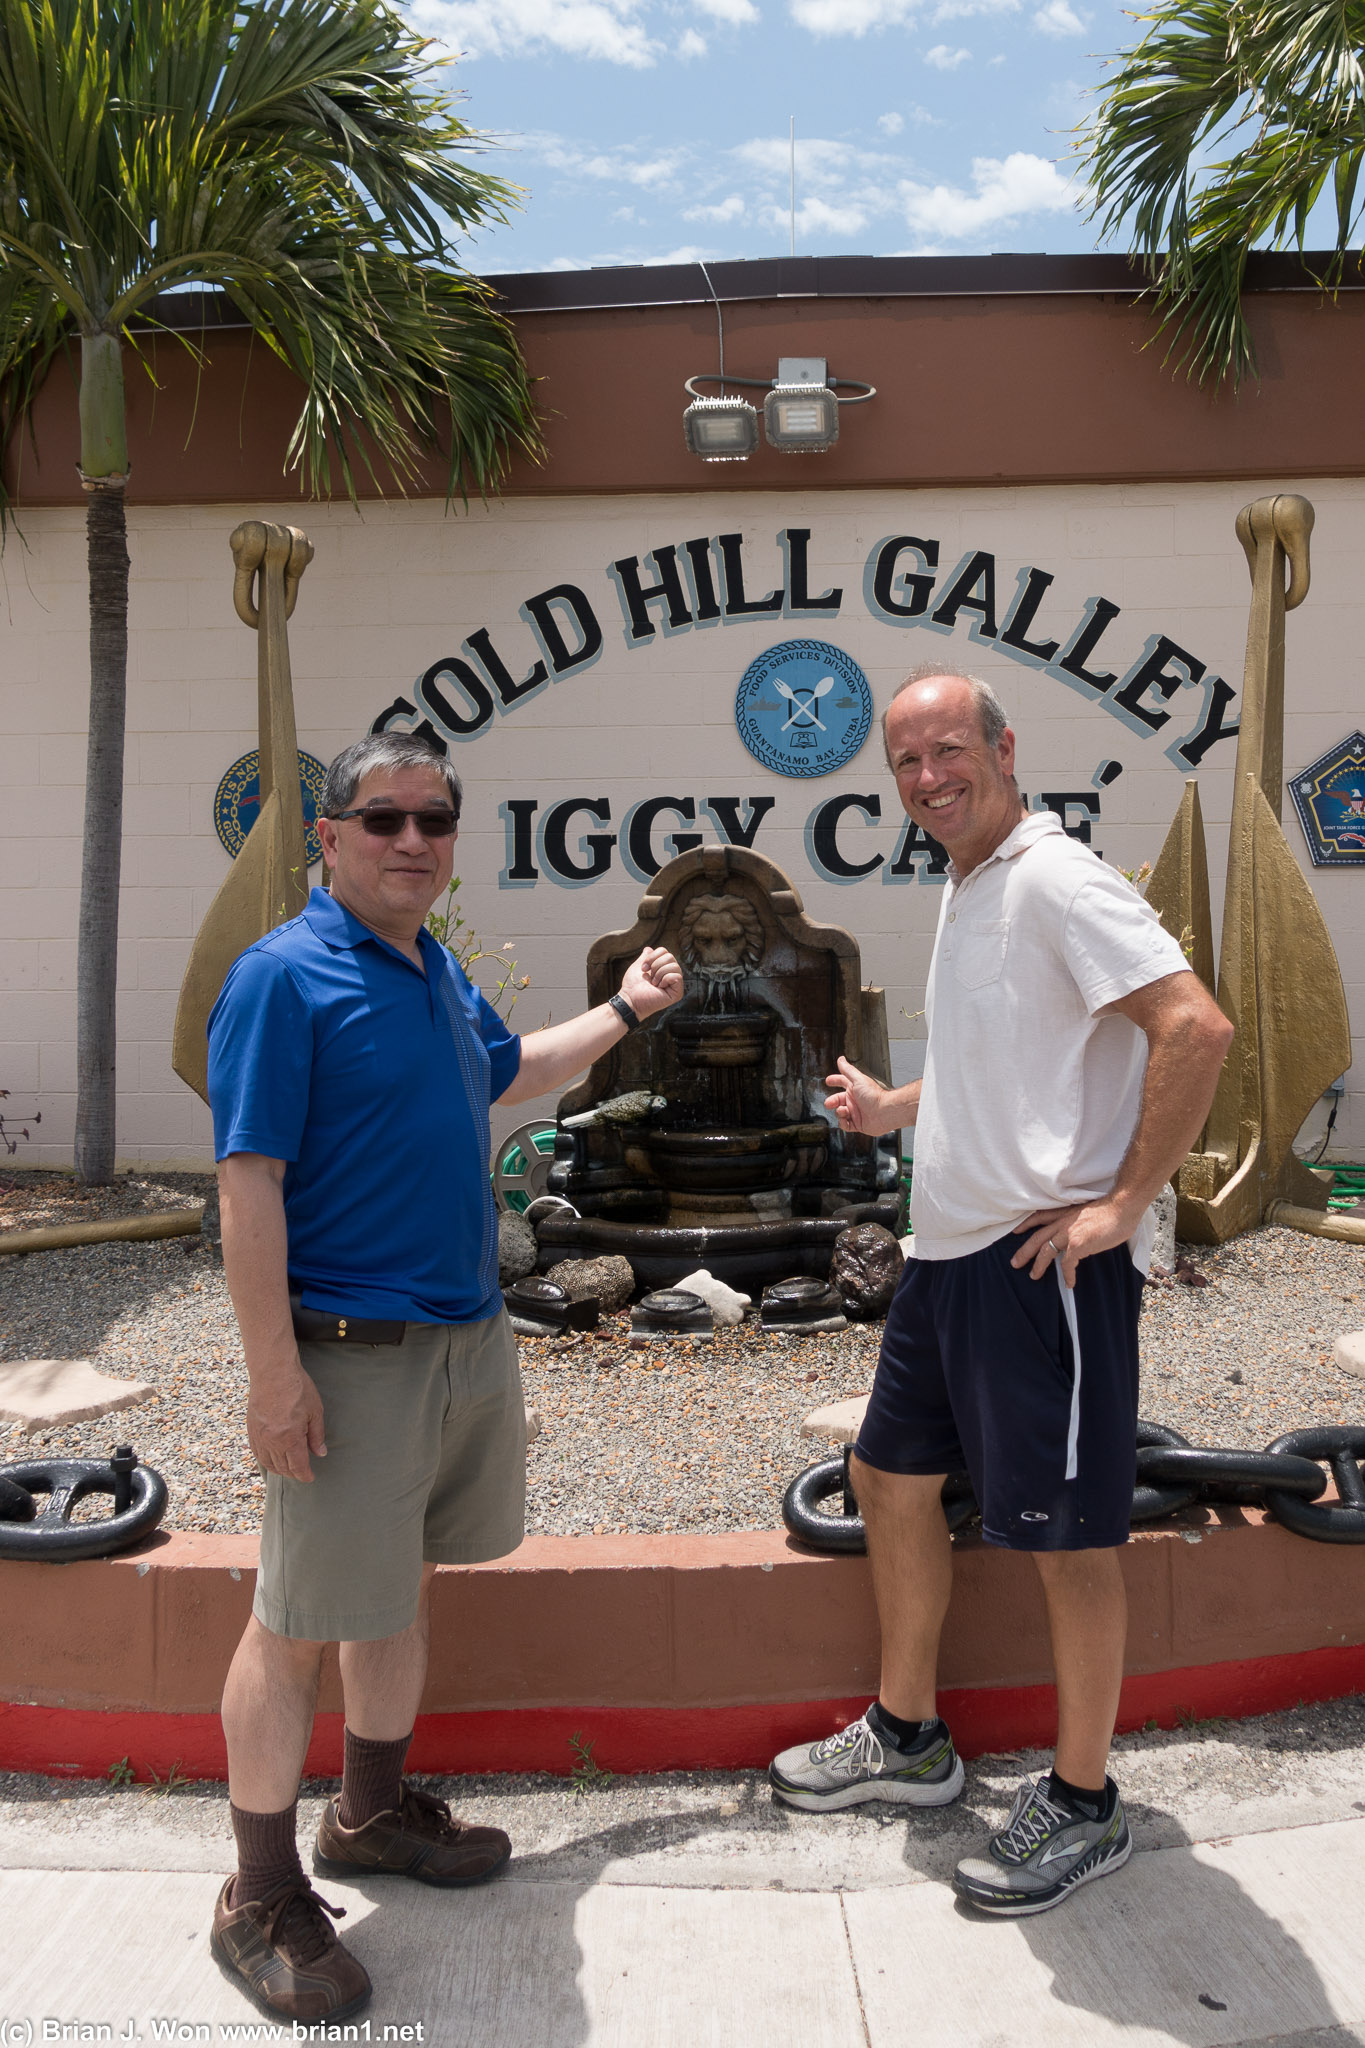 Posing outside Gold Hill Galley/Iggy Cafe. Yes, more anchors!